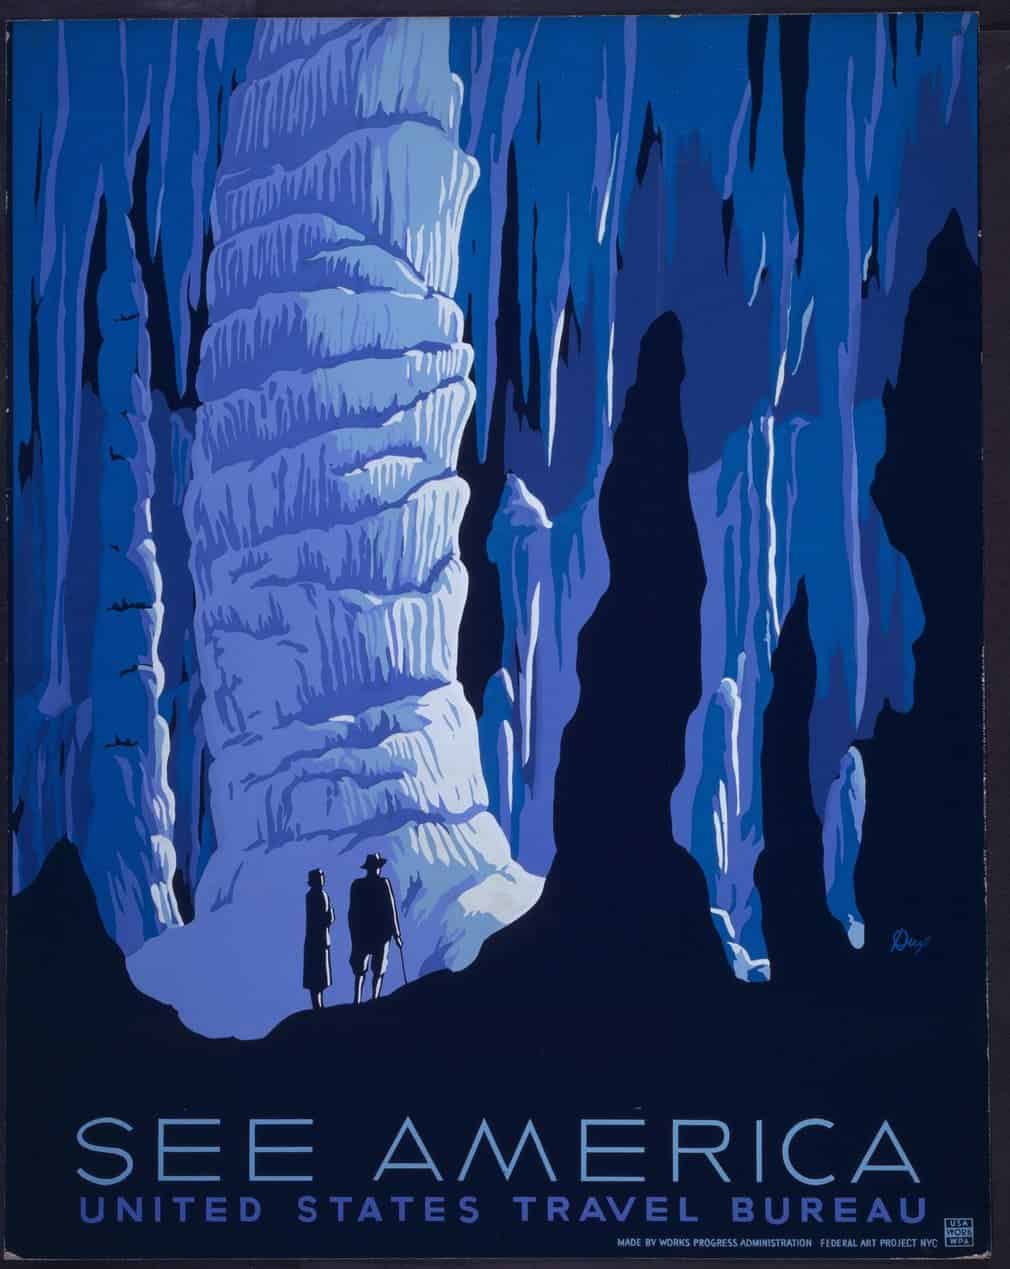 Poster promoting tourism in America, late 1930s.